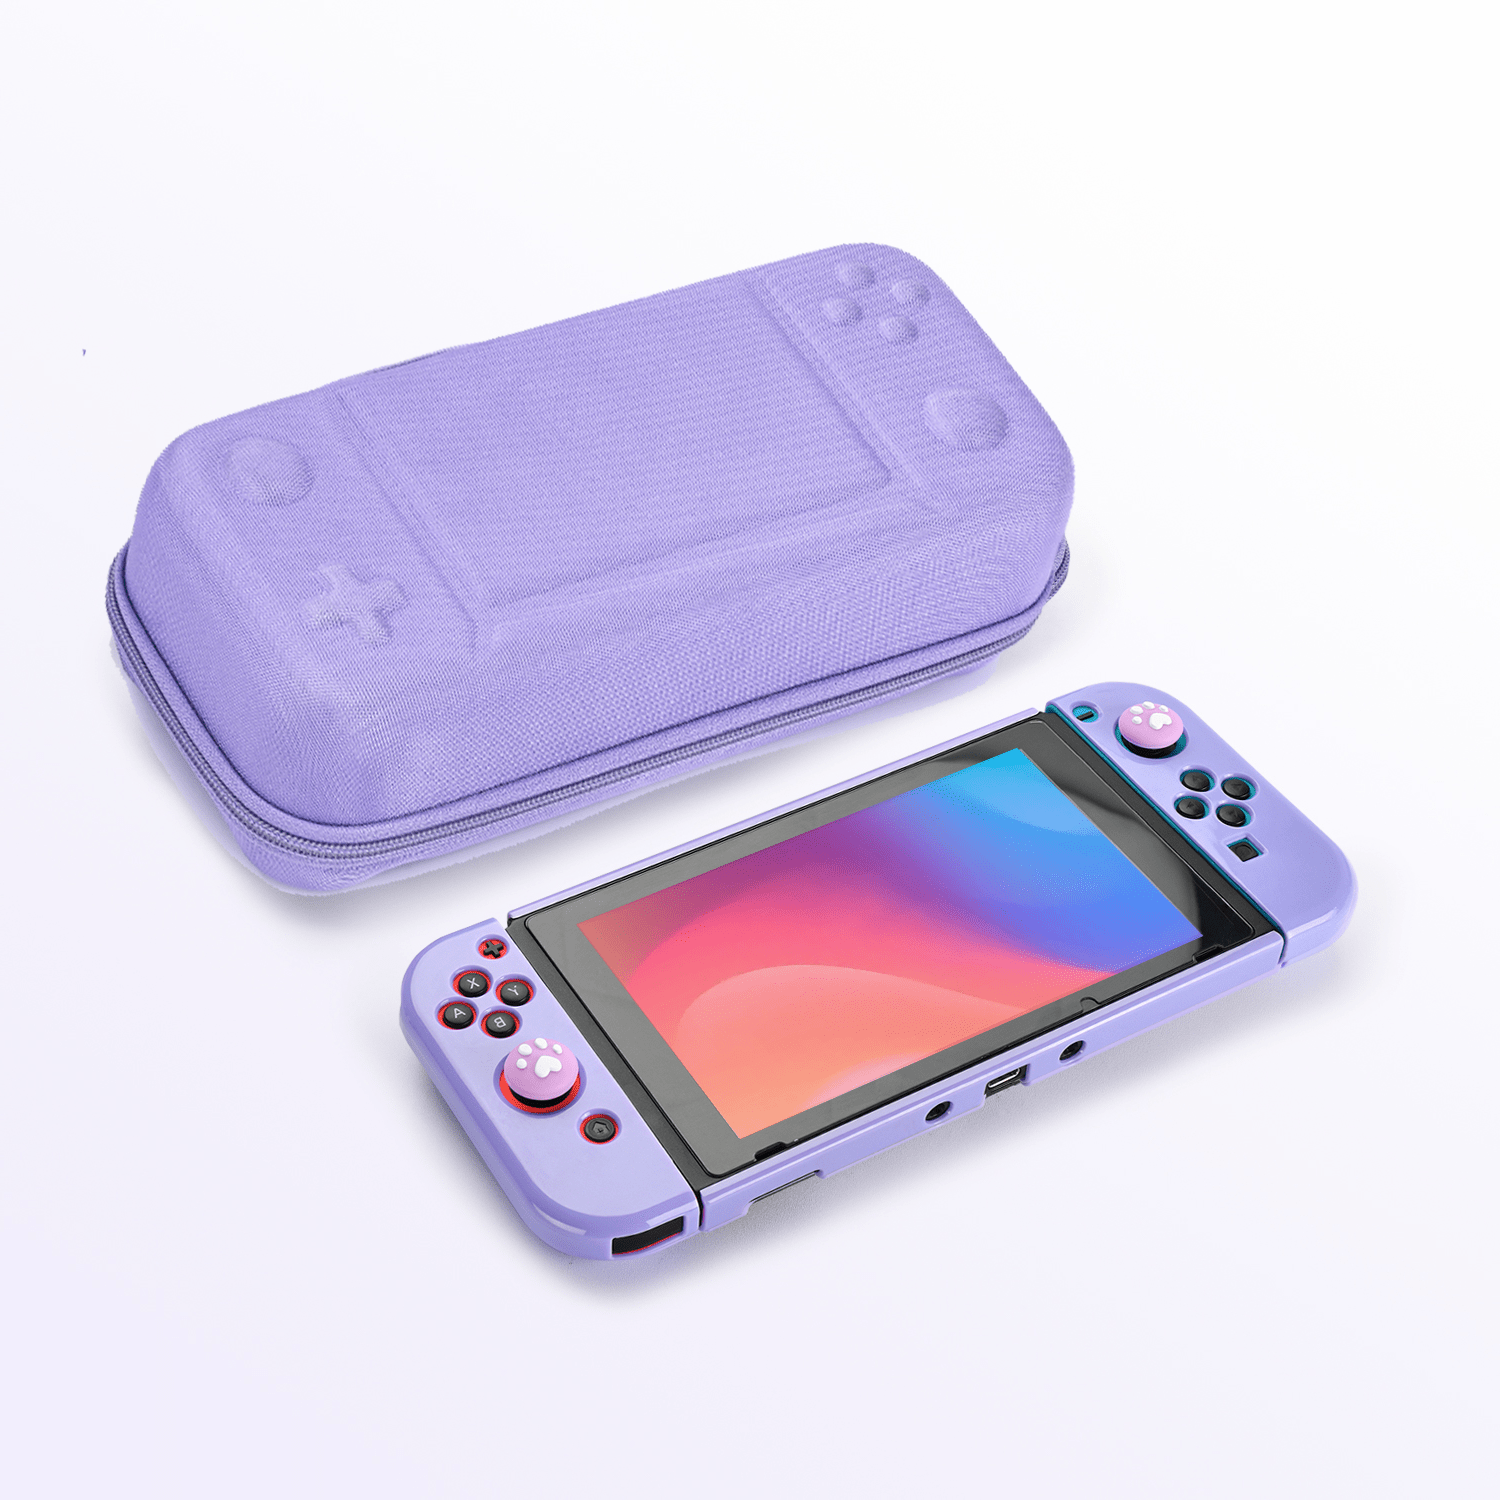 Younik Button Design Large Capacity Case for Switch, Switch Protective Carrying Case